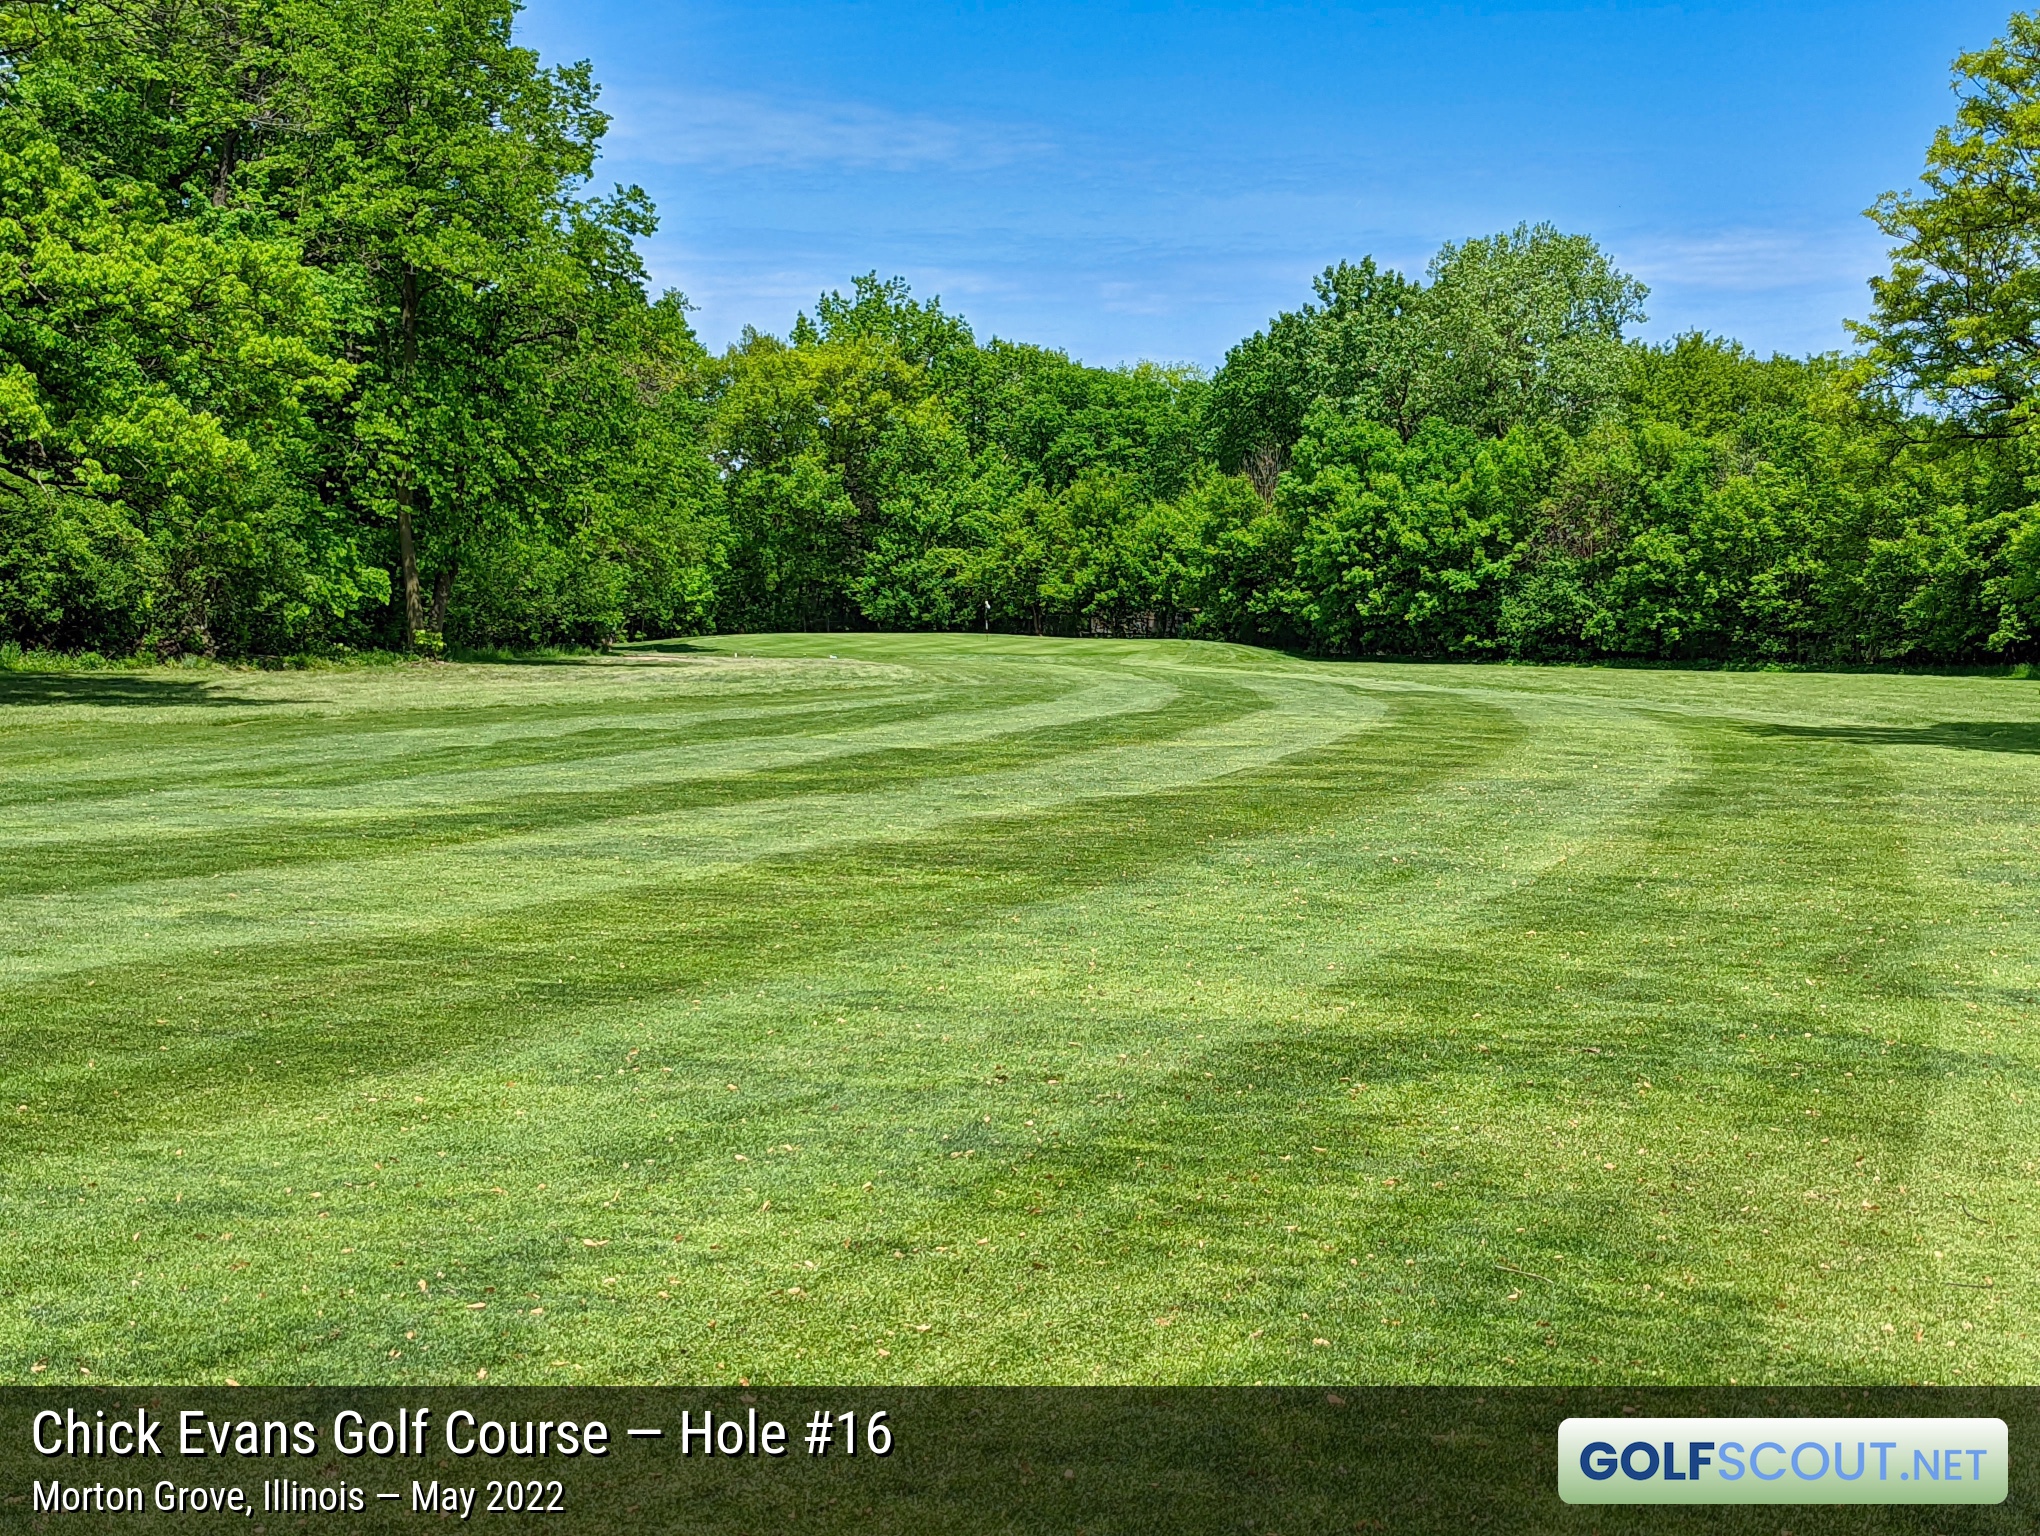 Photo of hole #16 at Chick Evans Golf Course in Morton Grove, Illinois. 